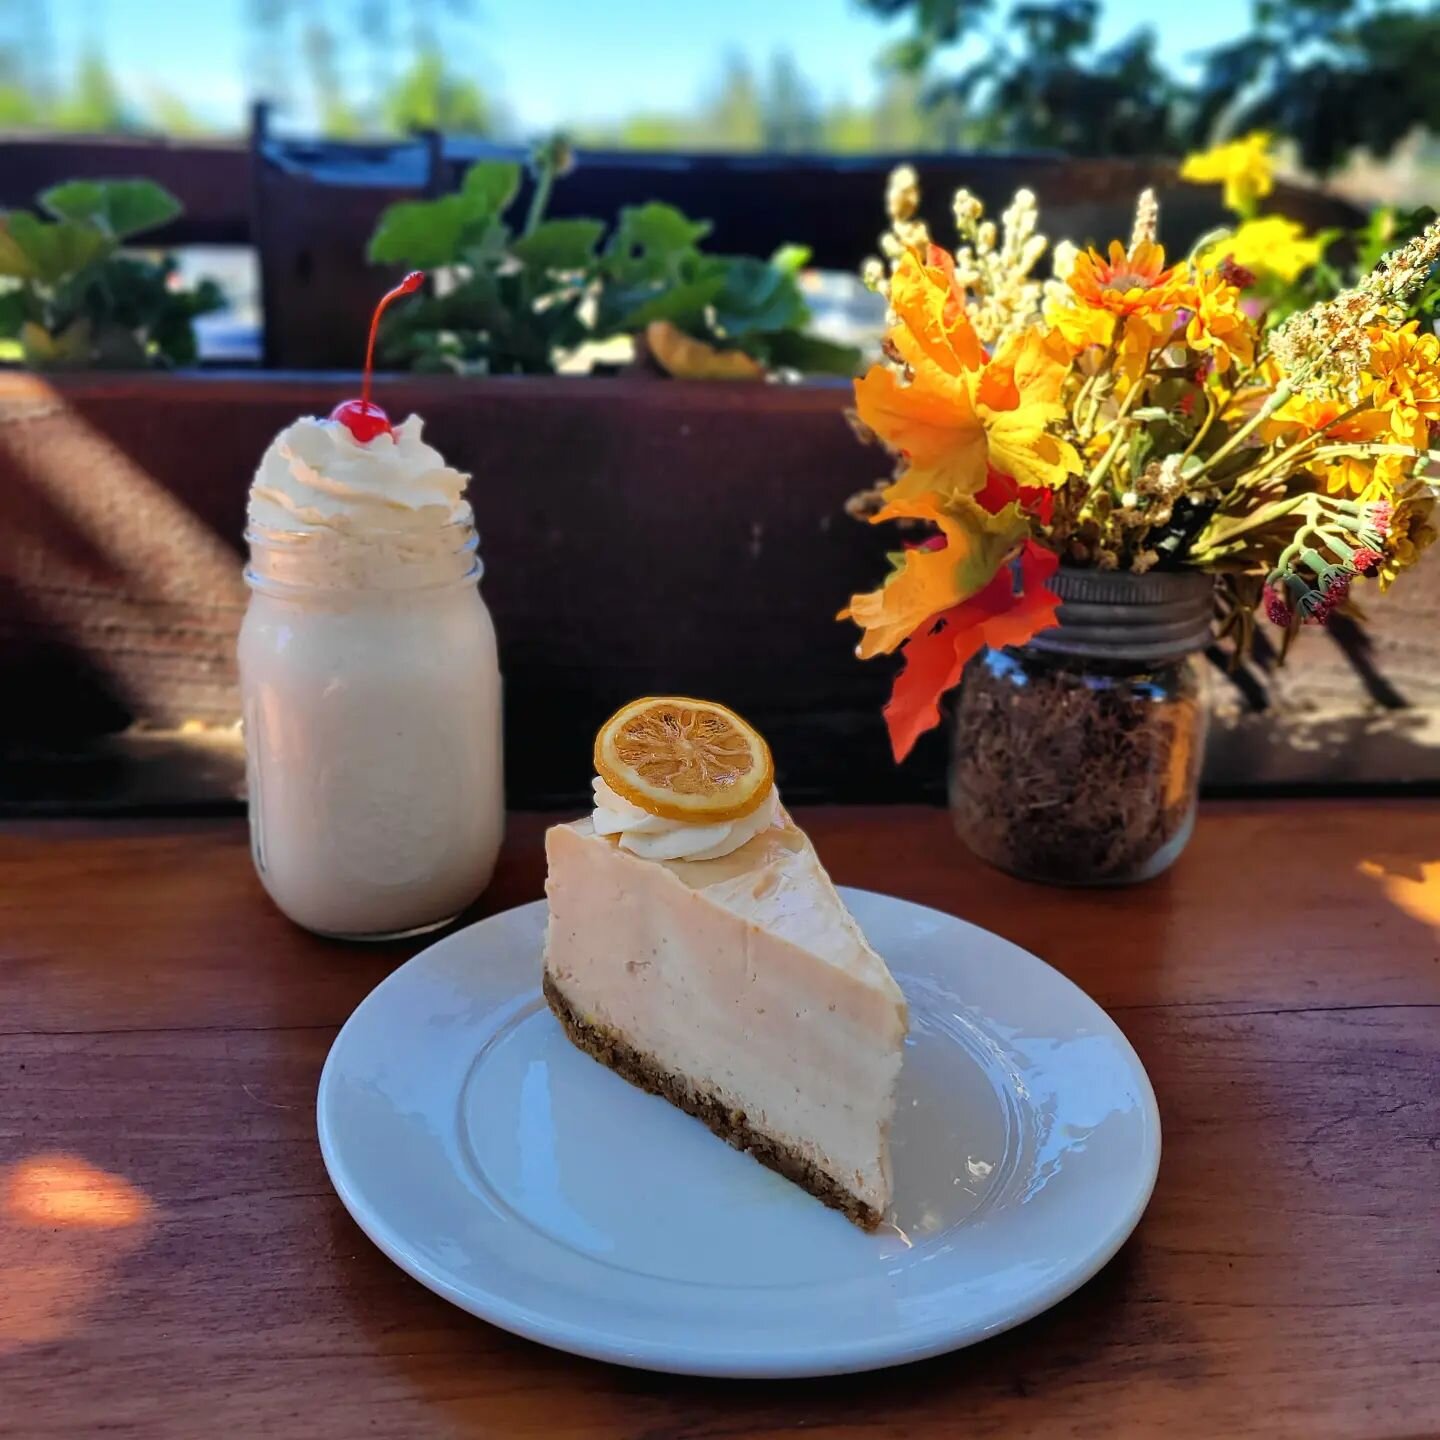 This month's feature is our orange Creamsicle cheesecake and milkshake. Come and enjoy your Canada day with a zesty treat! 🍊🇨🇦
.
.
.
#orangecreamsicle#orange#cheesecake#cheesecakeslice#treat#bakery#sugarshack#mychosensugarshack#metchosinbc#metchos